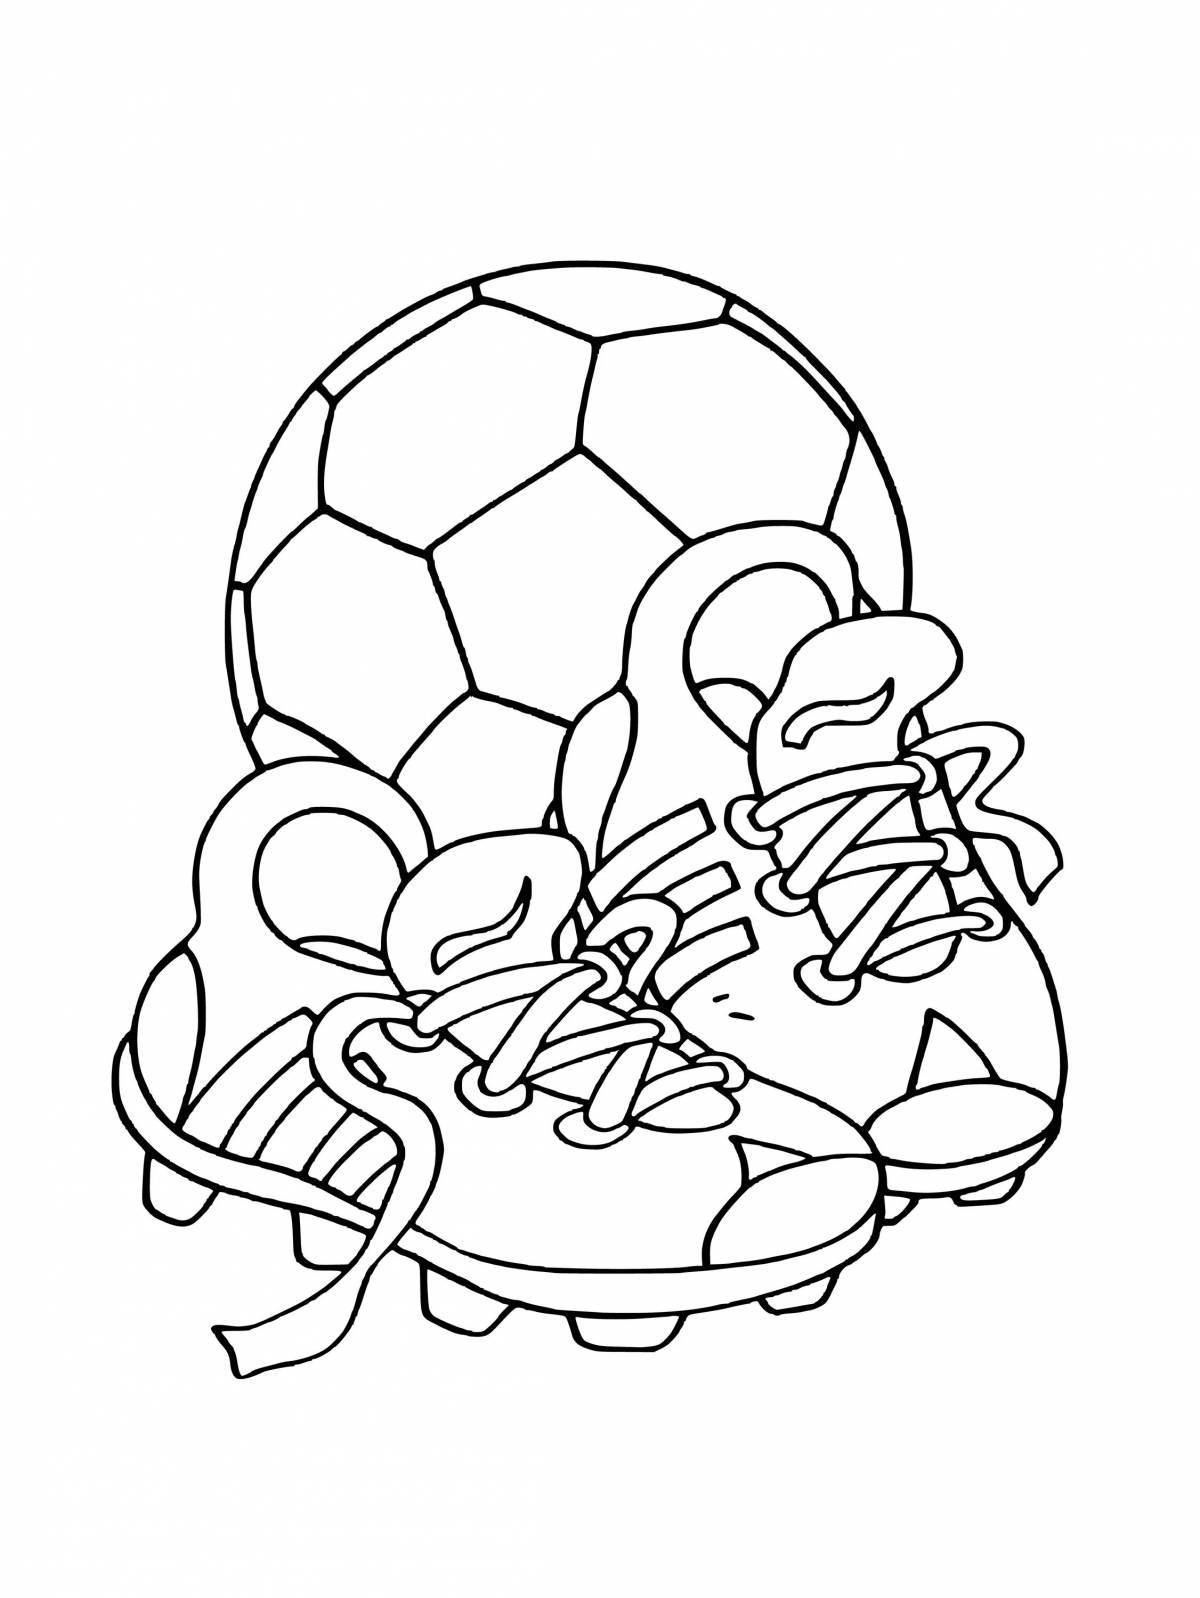 Coloring page funny football boots